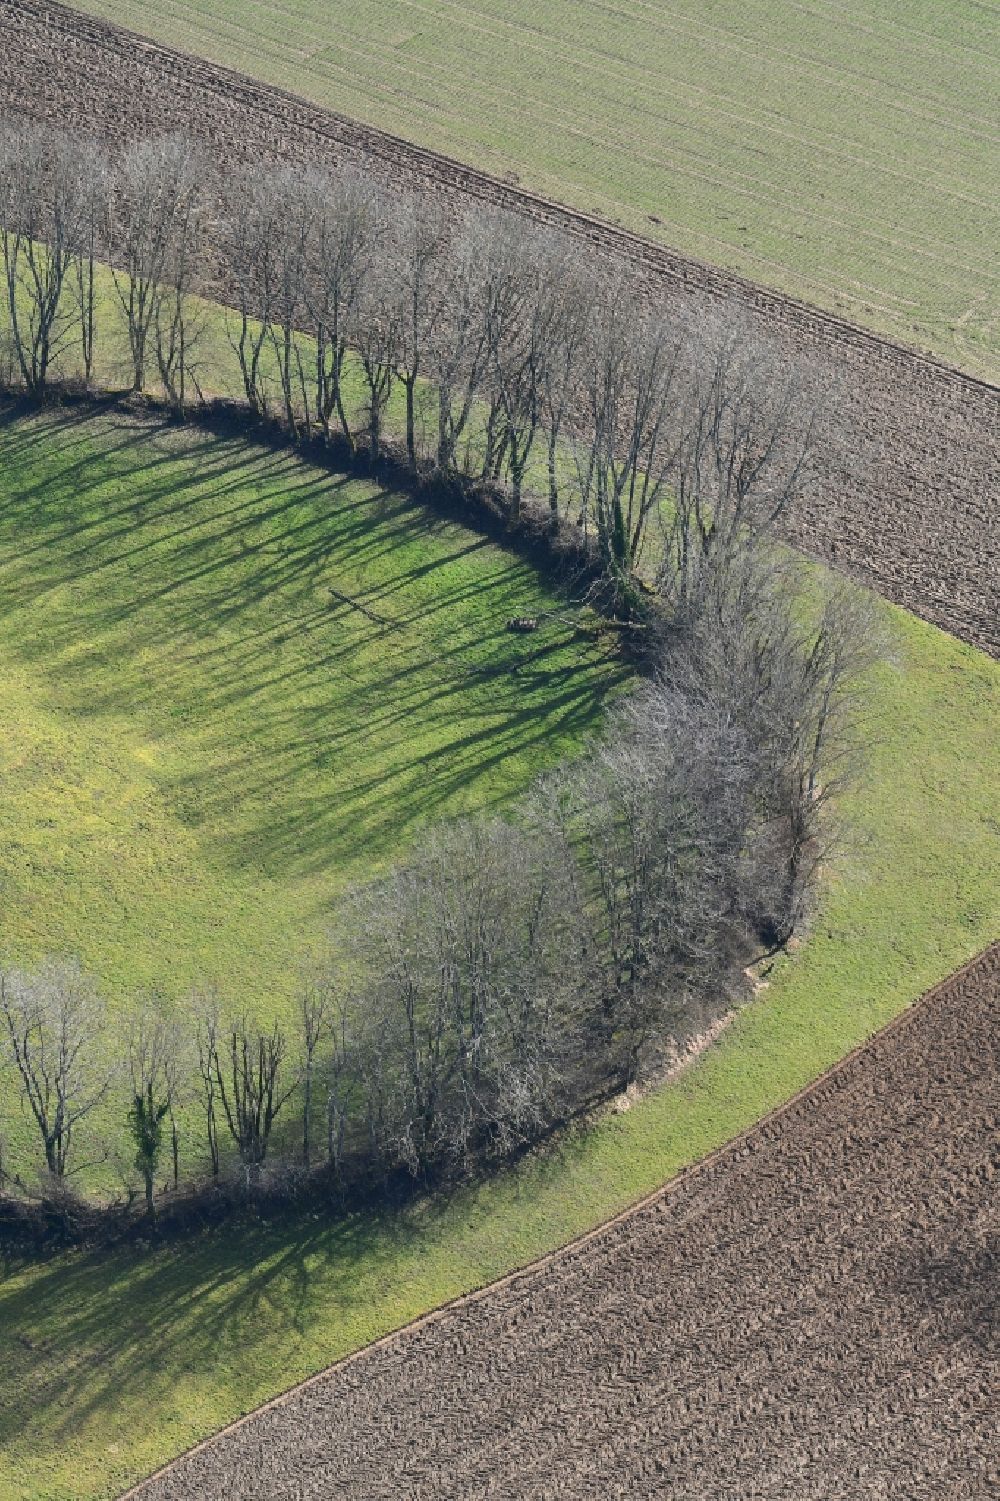 Aerial photograph Maulburg - Overlooking the tree circle in Maulburg in Baden-Wuerttemberg. Not the Celts, but remnants of the Second World War have created this tree circle in Maulburg. On the mountain ridge of the Dinkelberg between the southern Black Forest and the Swiss border in the last years of the war a radio direction finding station with a large rotating directional antenna was installed. It was used for aircraft positioning. After the war the plant was dismantled, but the circular foundation not completely. Meanwhile bushes and trees have grown as a circular wood from the remains of the foundation